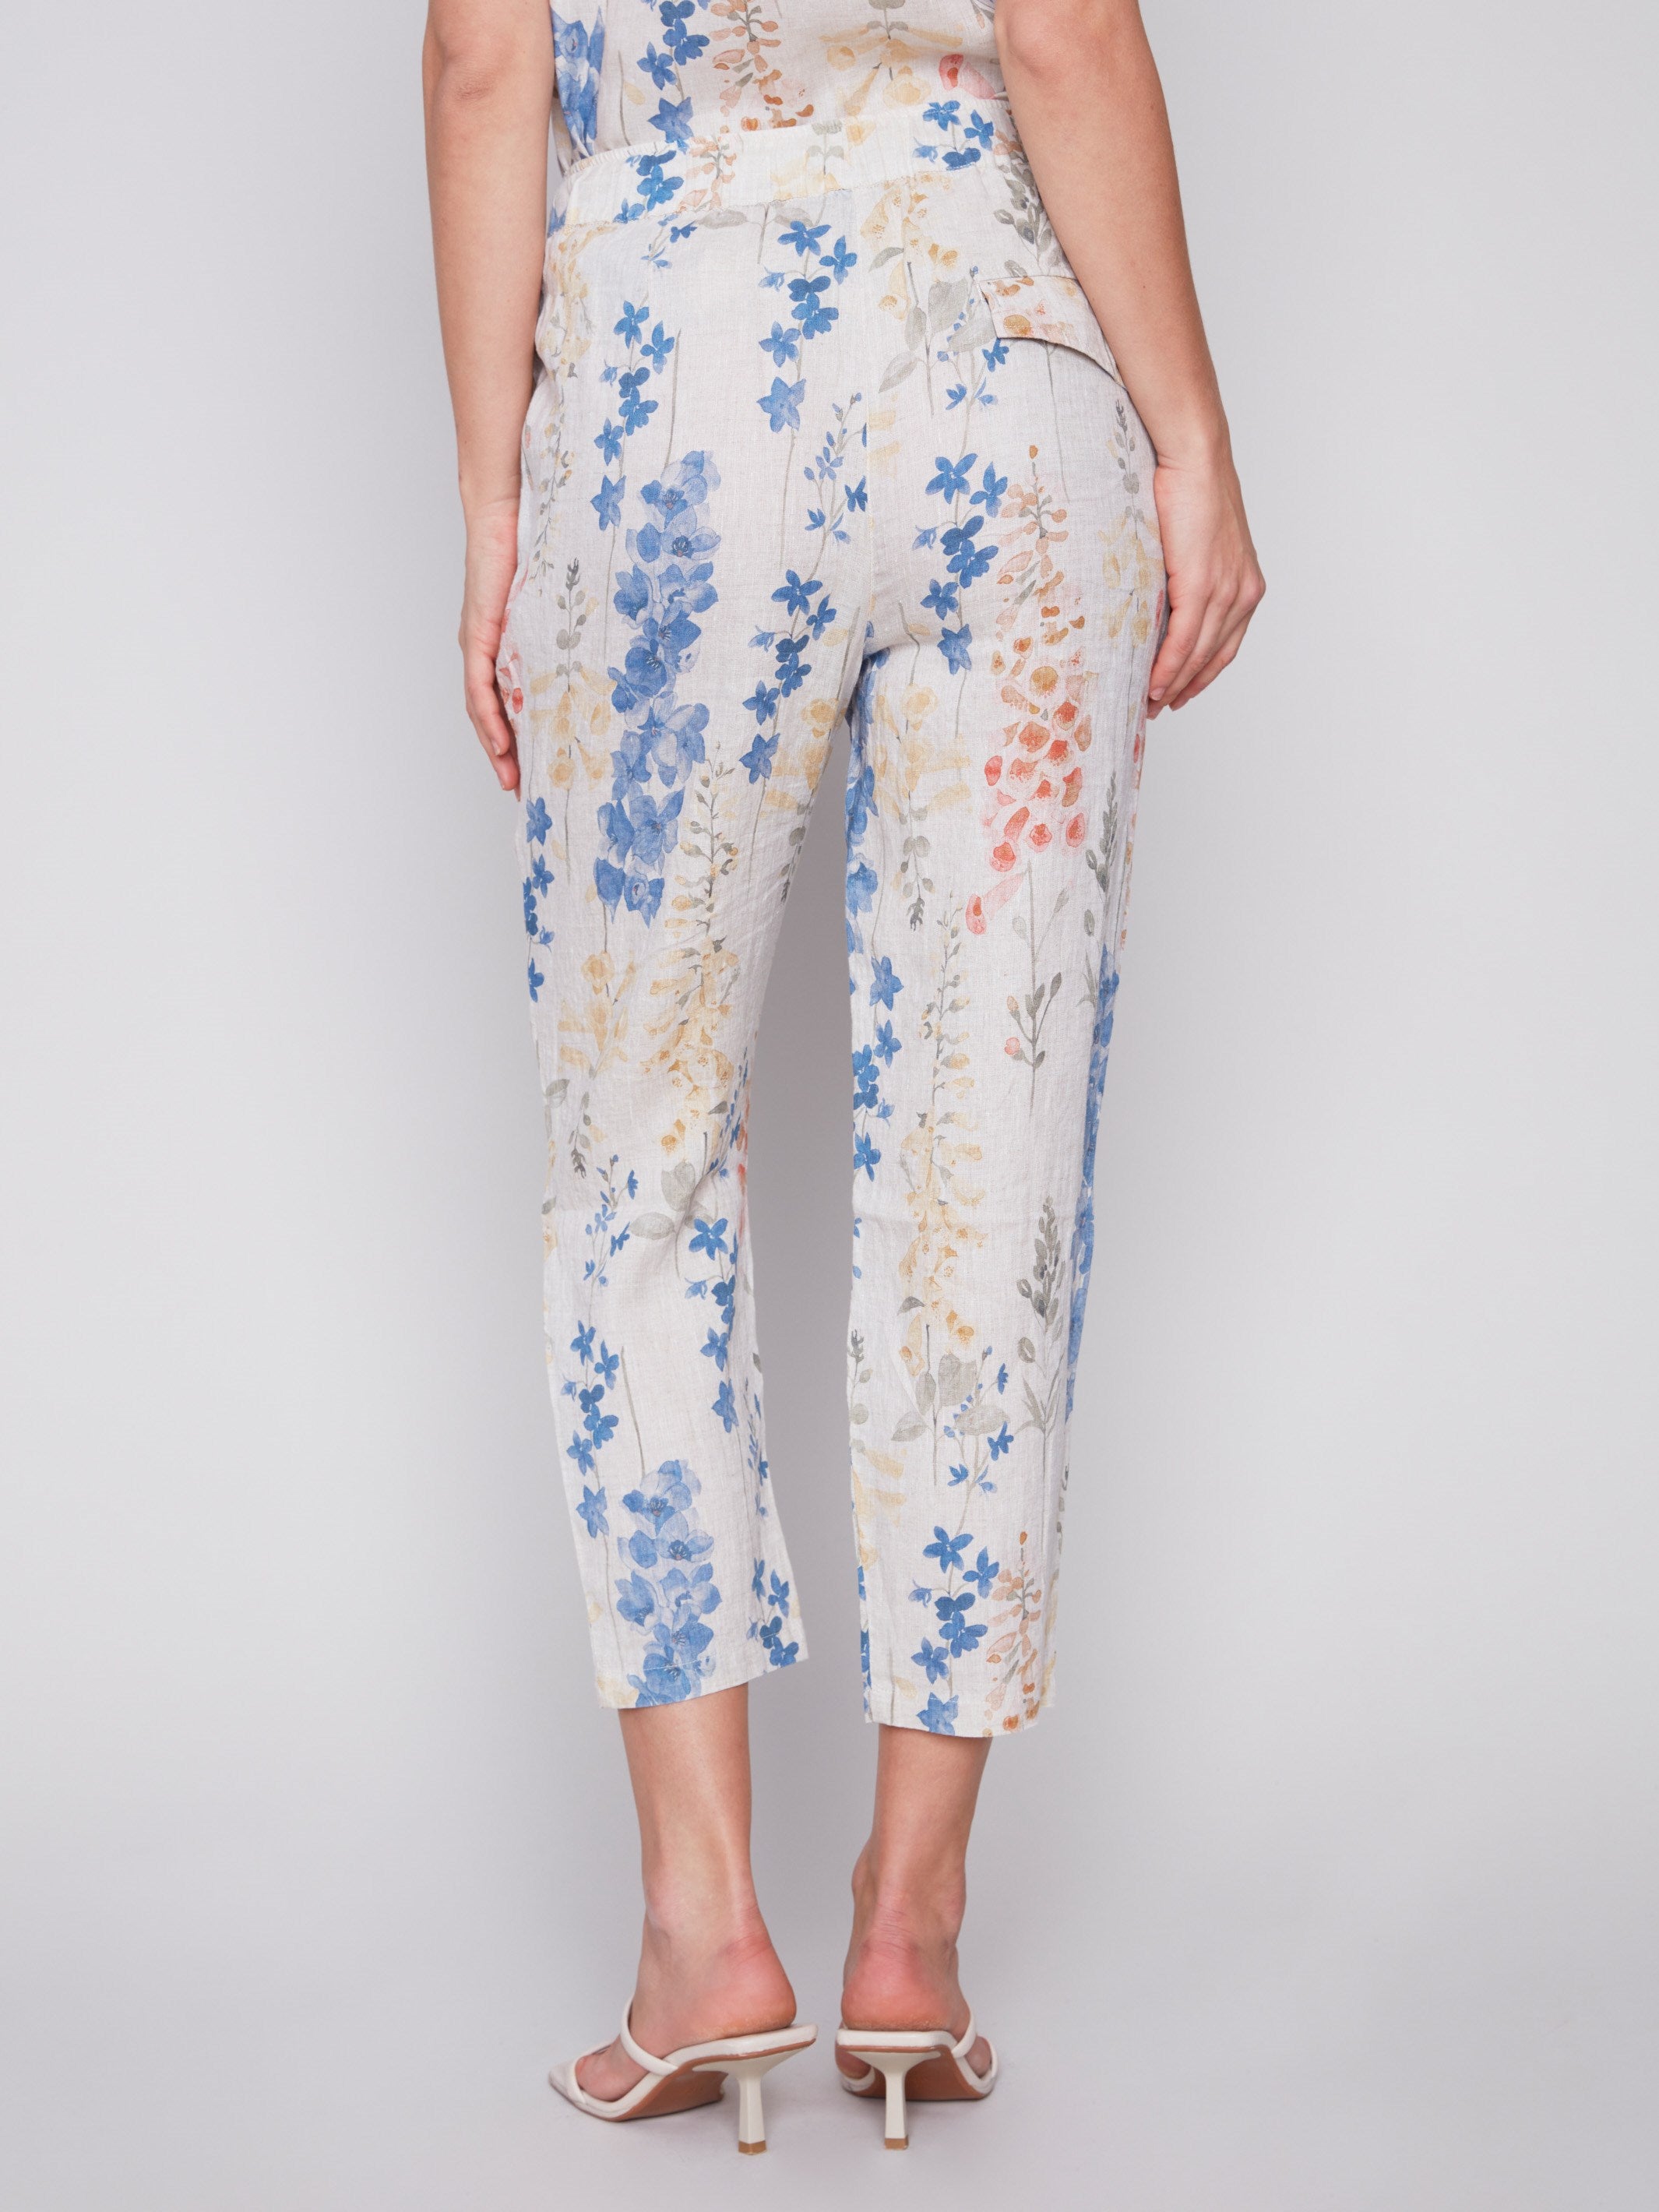 Printed Linen Pull-On Pants - Garden - Charlie B Collection Canada - Image 3